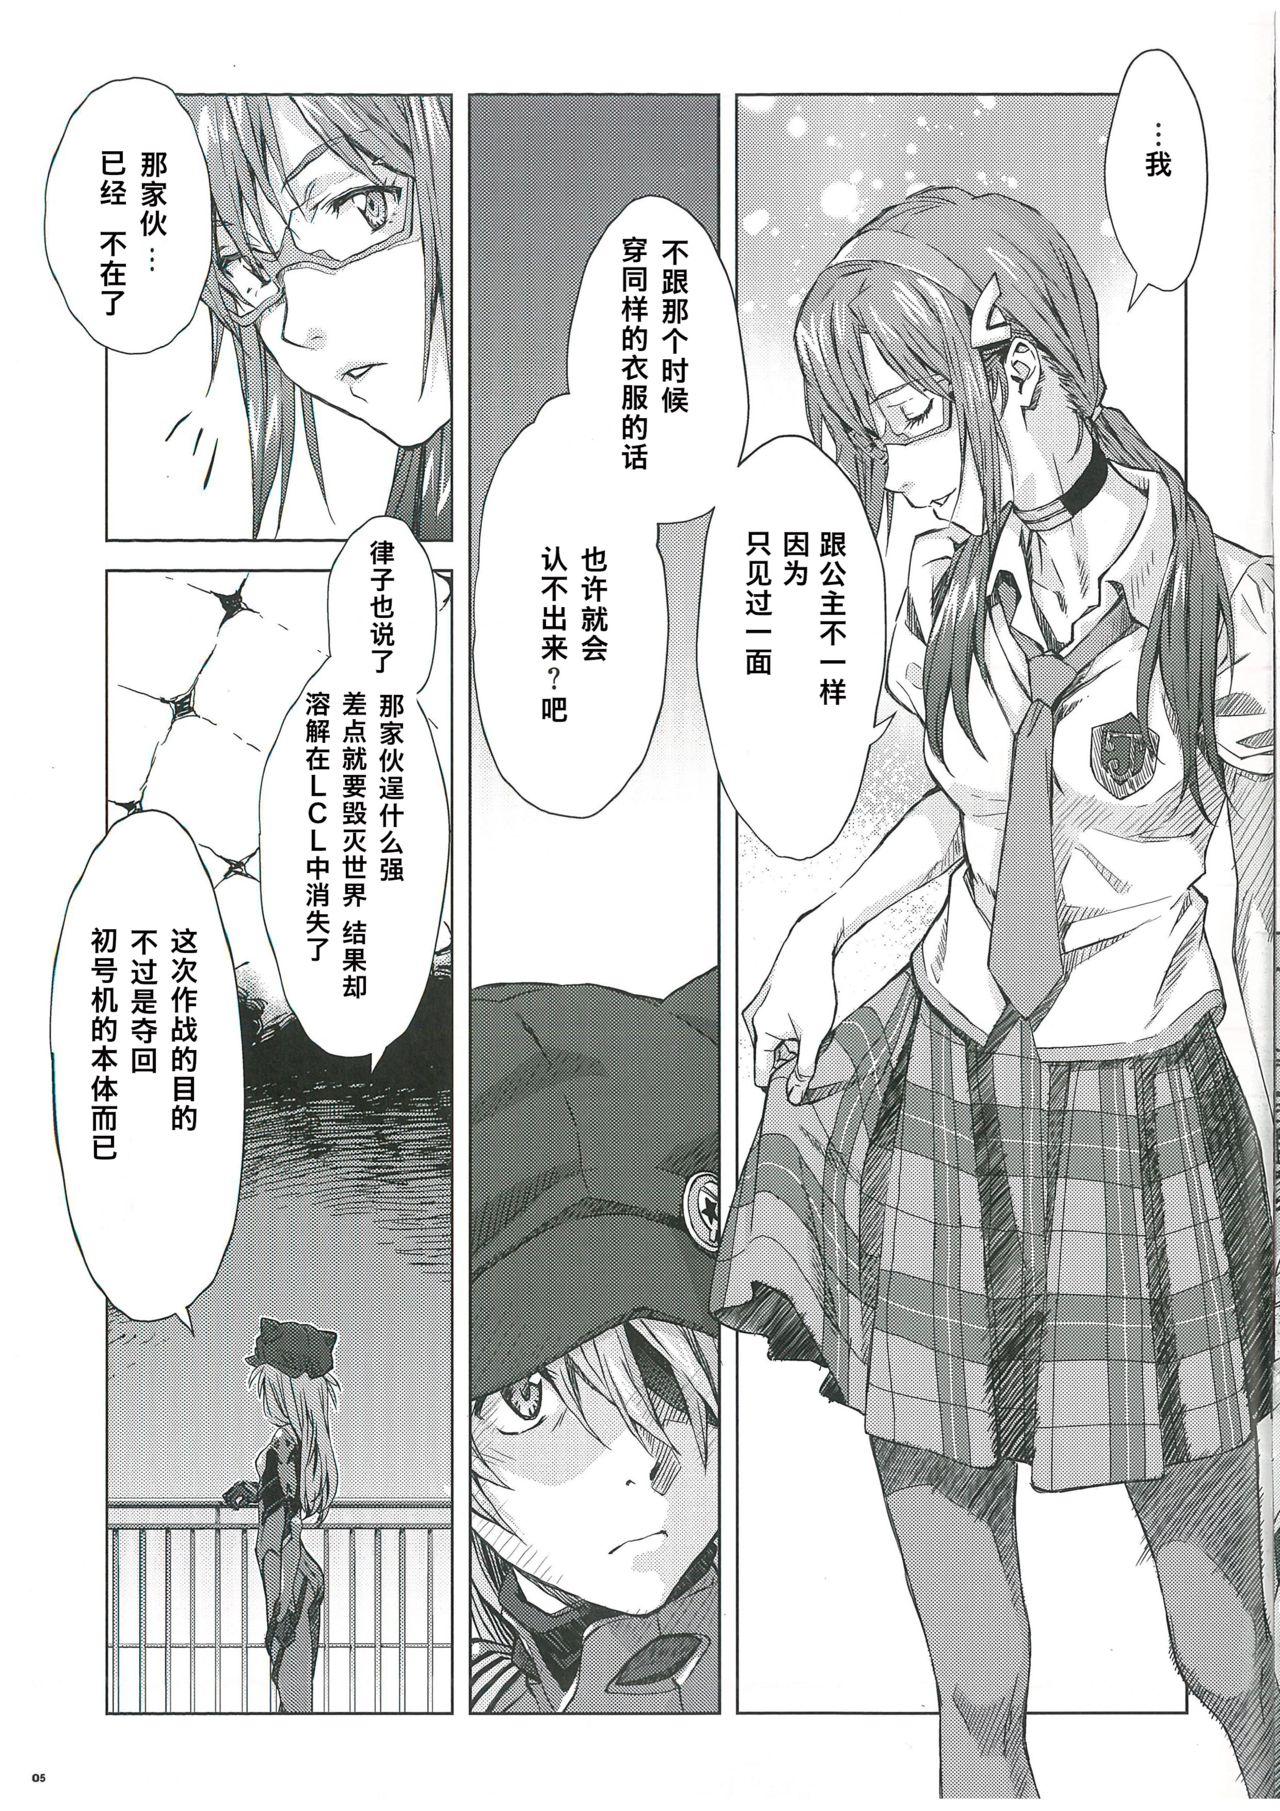 Gay Uniform (EVA EXTRA EX)Evangelion 3.0 (-120 min.) and Illustrations [Chinese] - Neon genesis evangelion Real Couple - Page 7